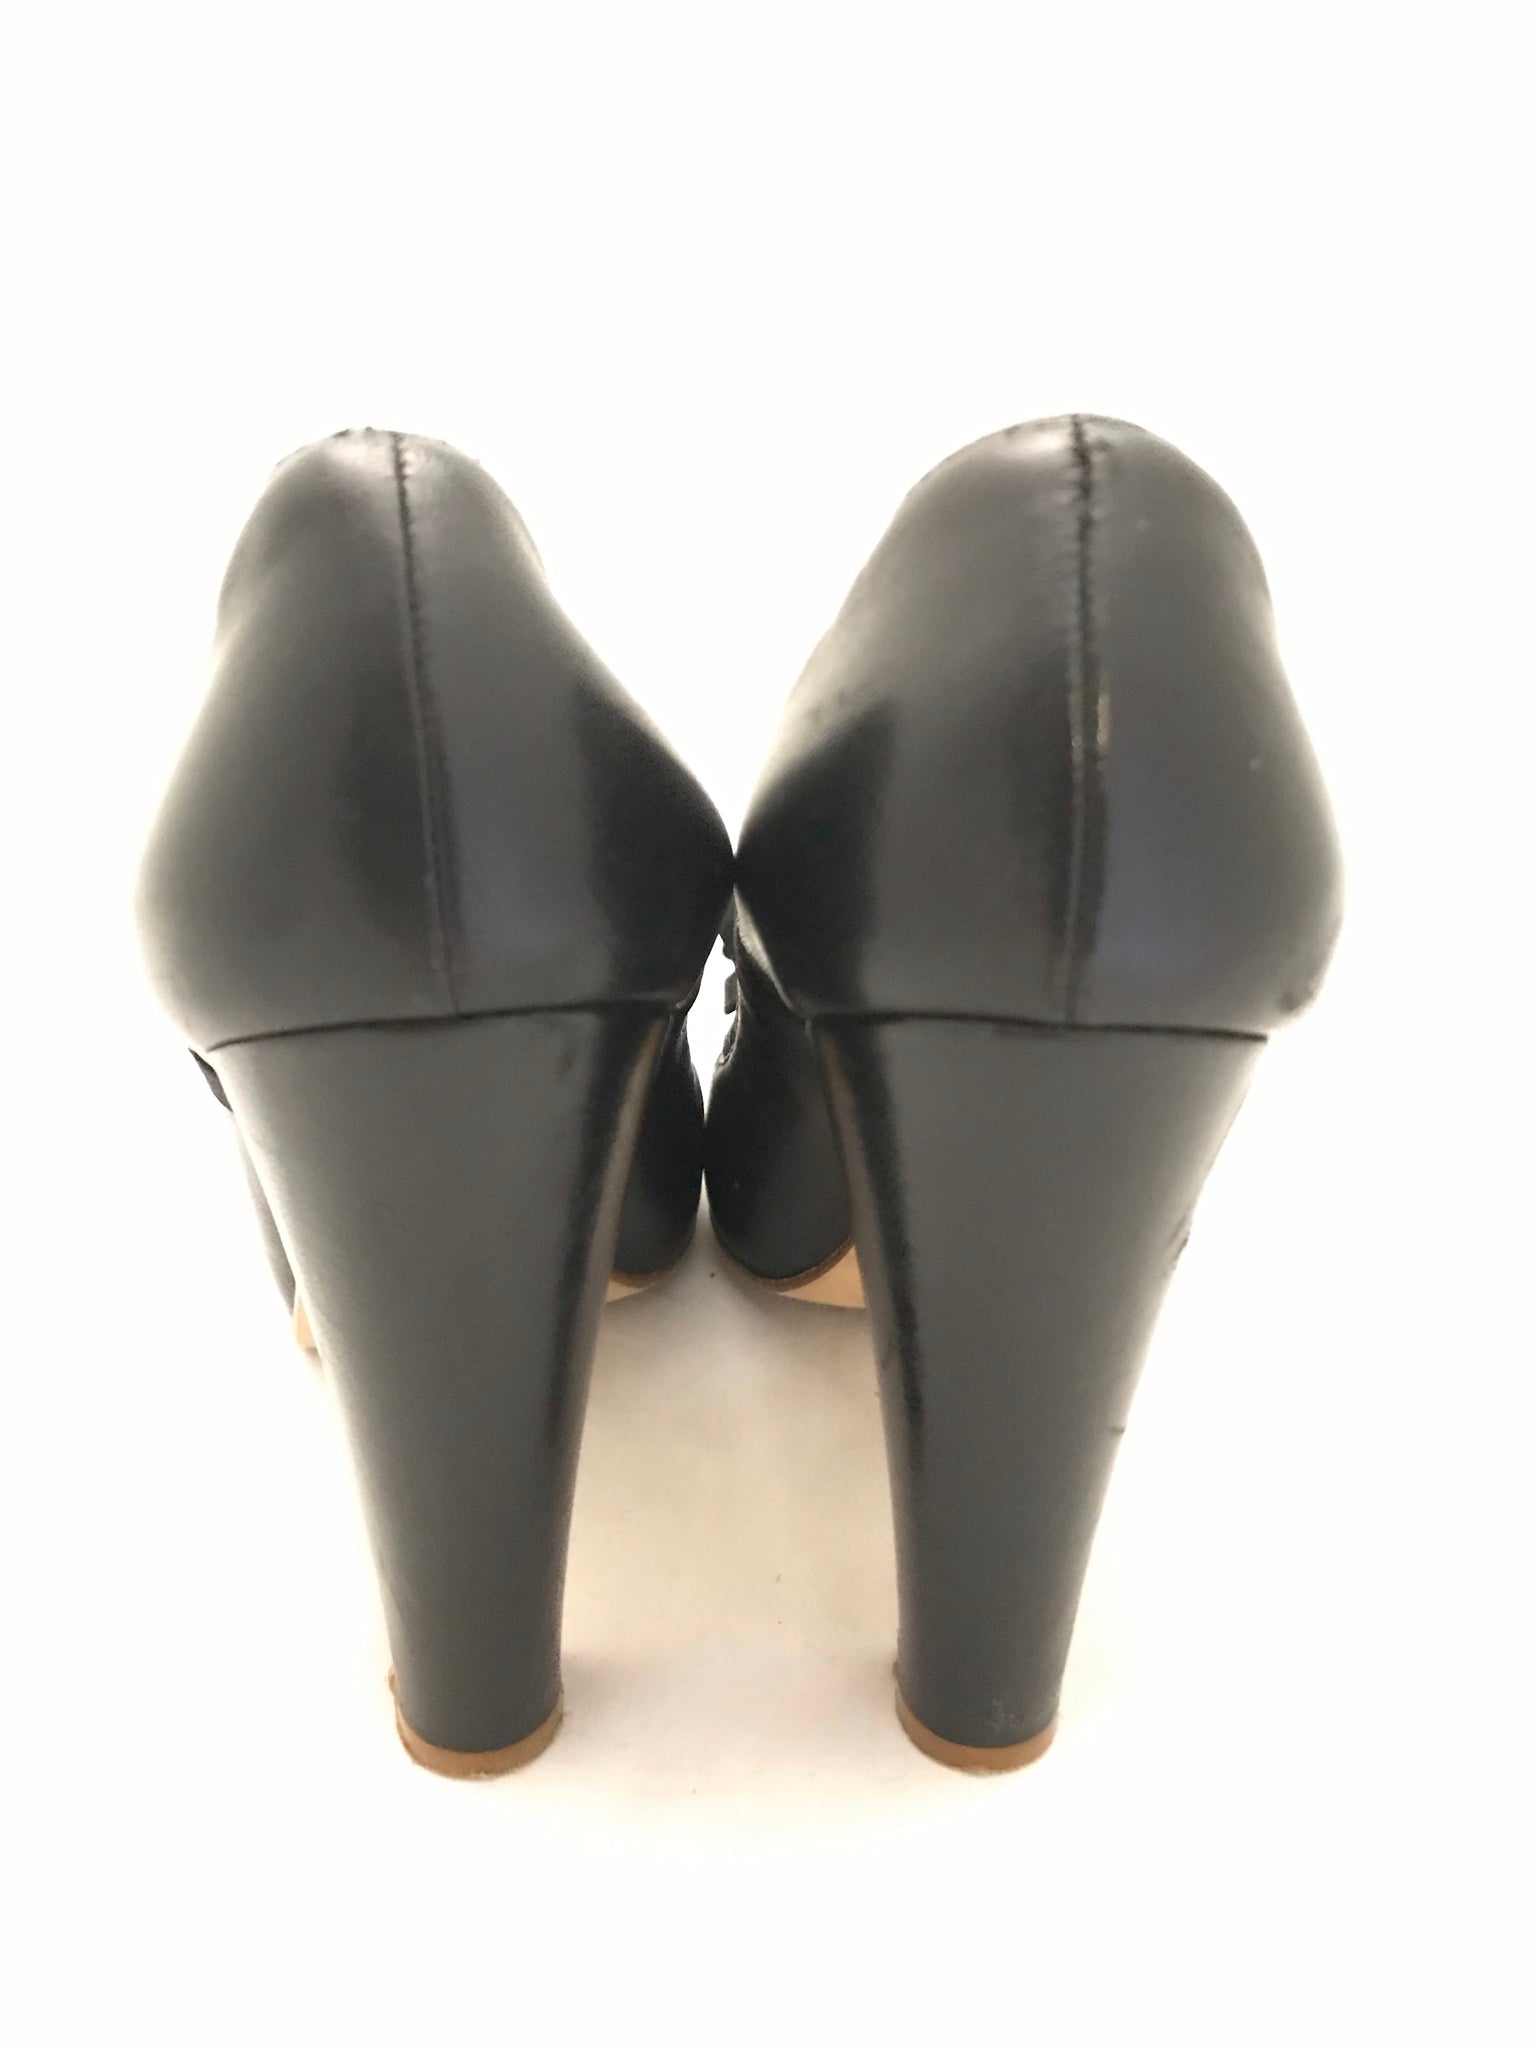 Isabella's Wardrobe Marc by Marc Jacobs Bow Detail Heels.